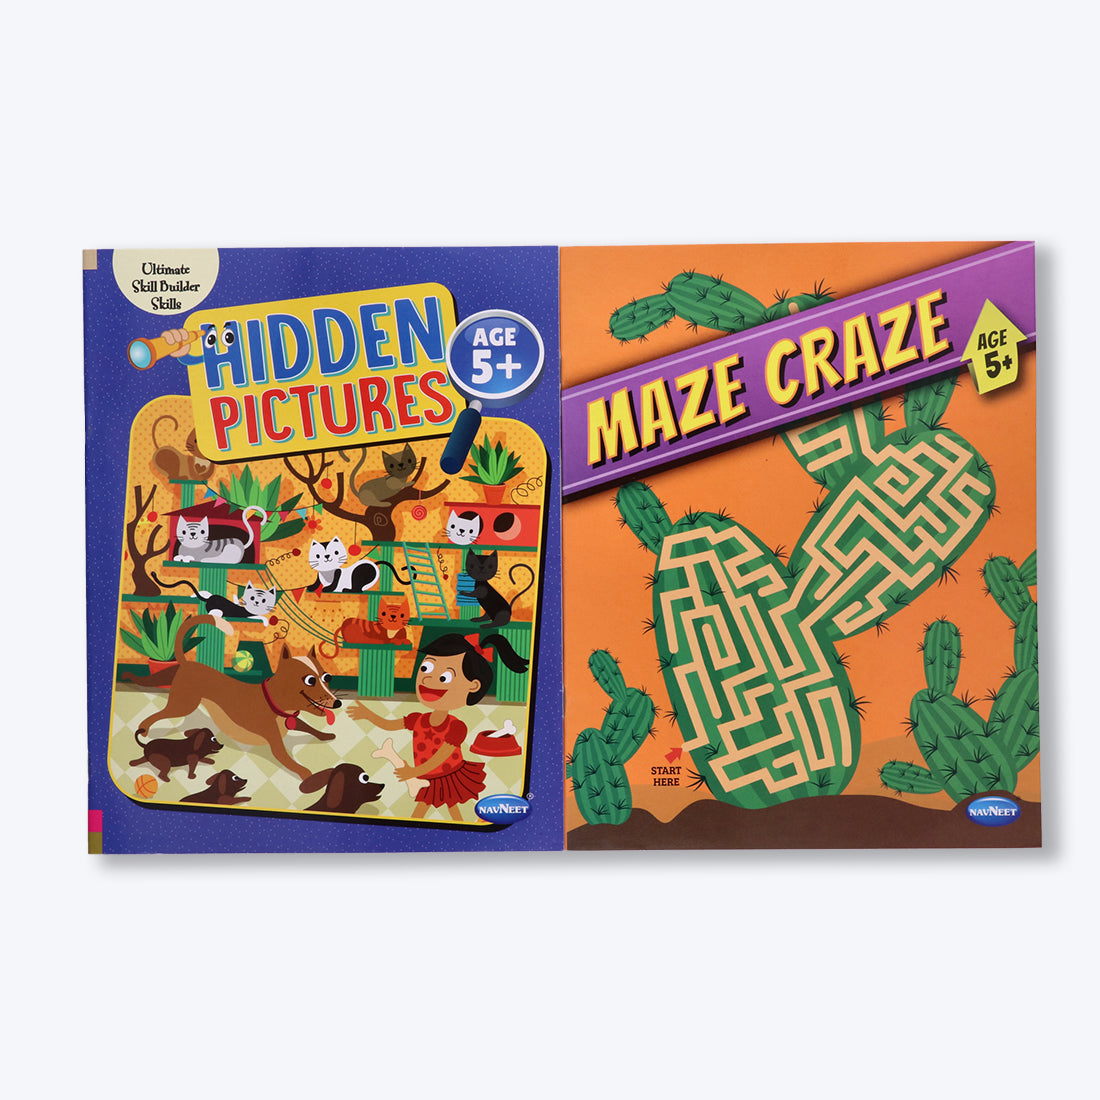 Navneet Maze Craze and Hidden Picture for 5+ age set of 2 books packed with activities